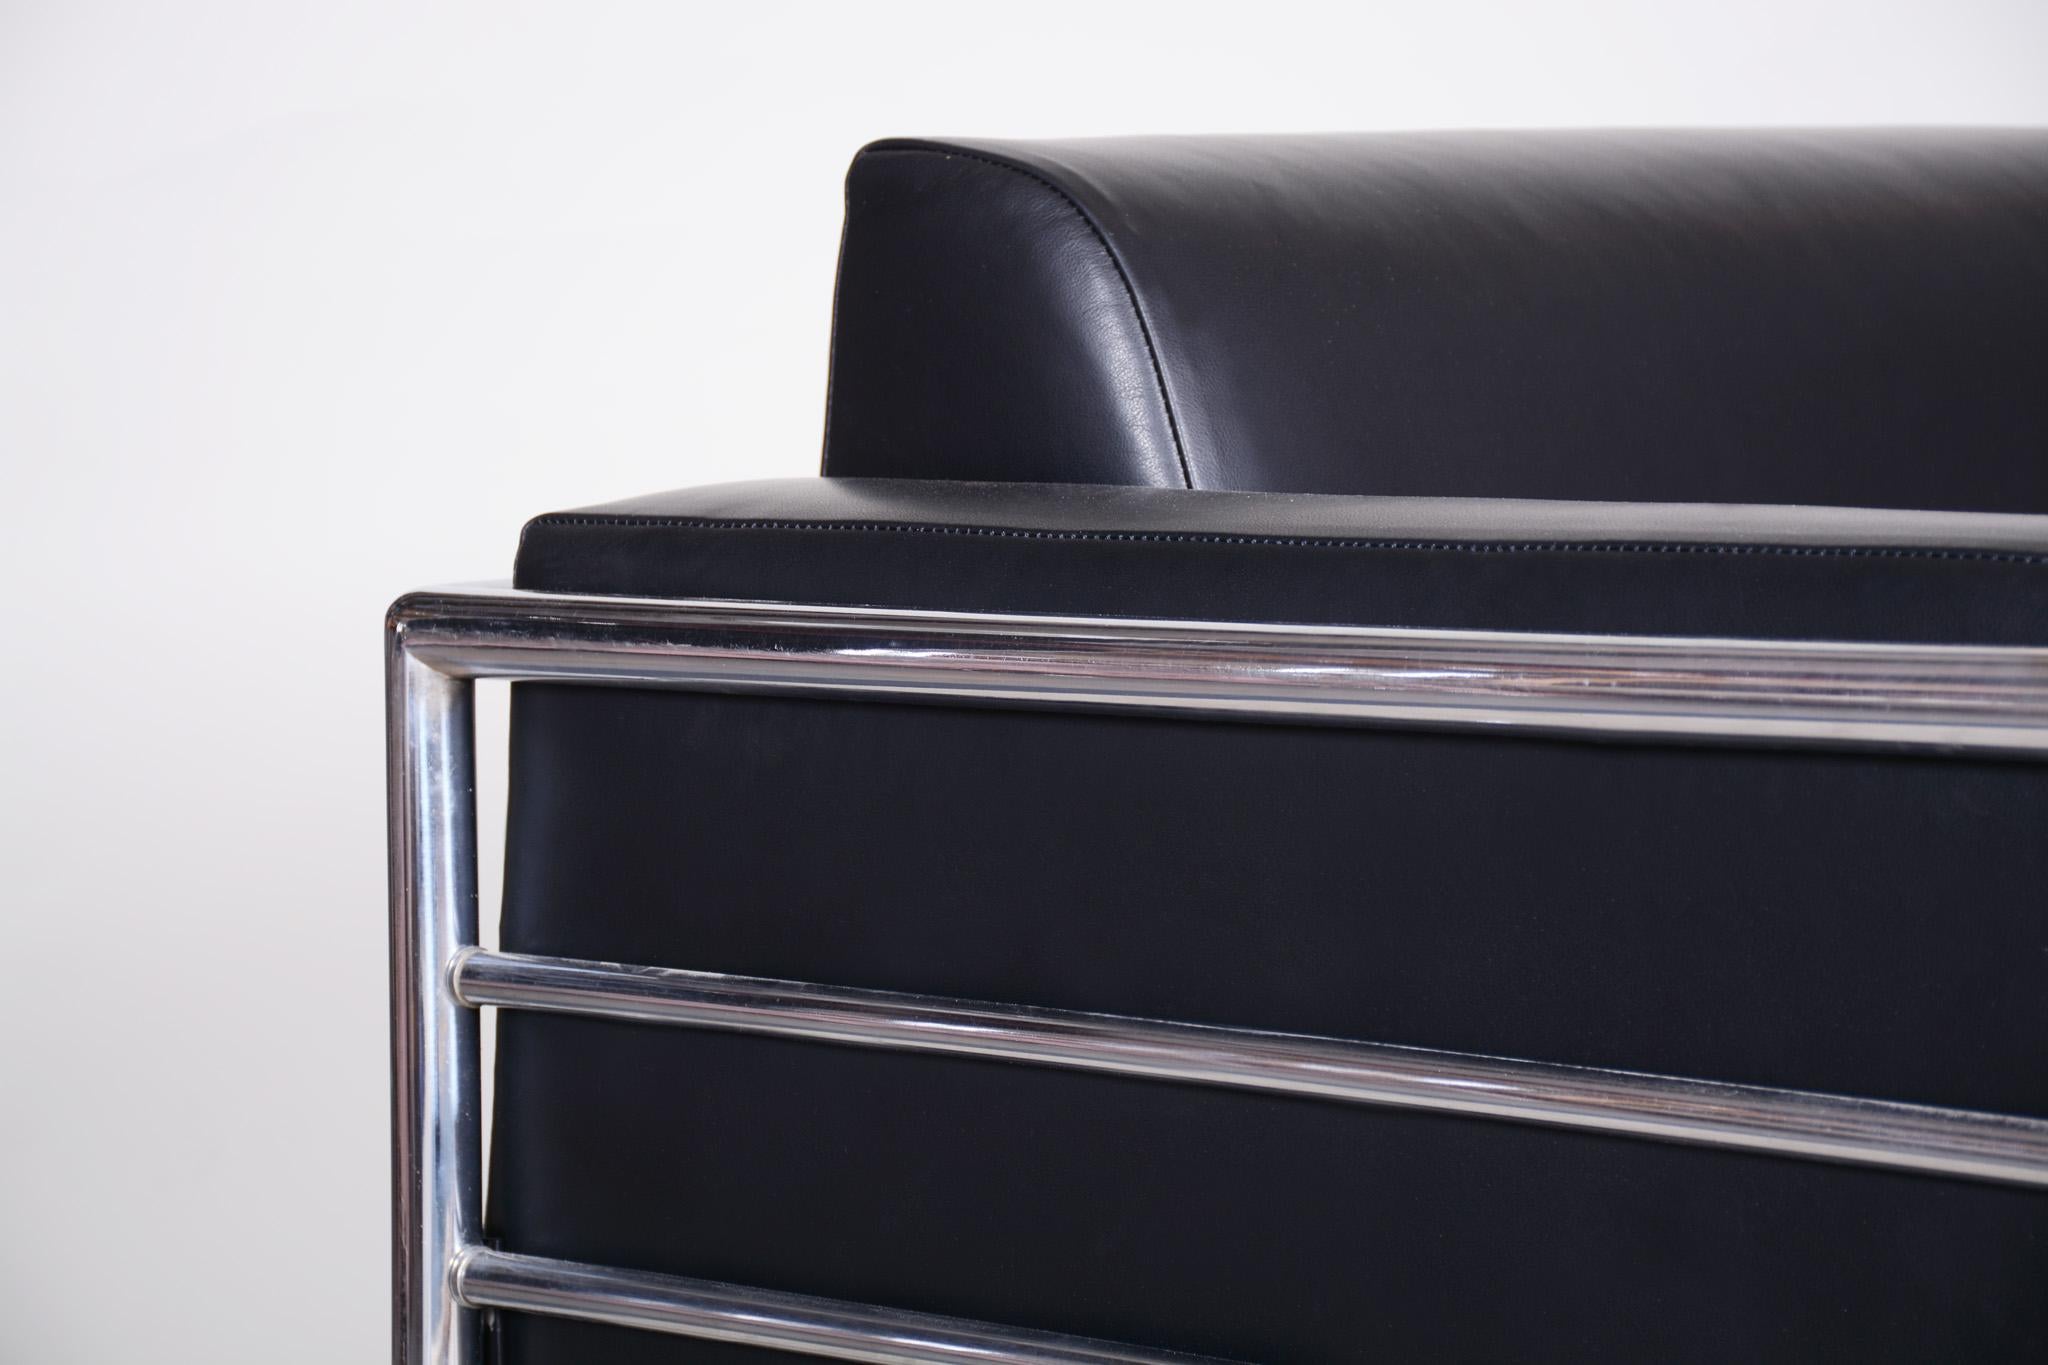 Bauhaus style sofa with chrome tubular steel frame.
Manufactured by Vichr a Spol in the 1930s.
Chrome tubular steel is in perfect original condition.
Upholstered to high quality leather
Source: Czechia (Czechoslovakia).